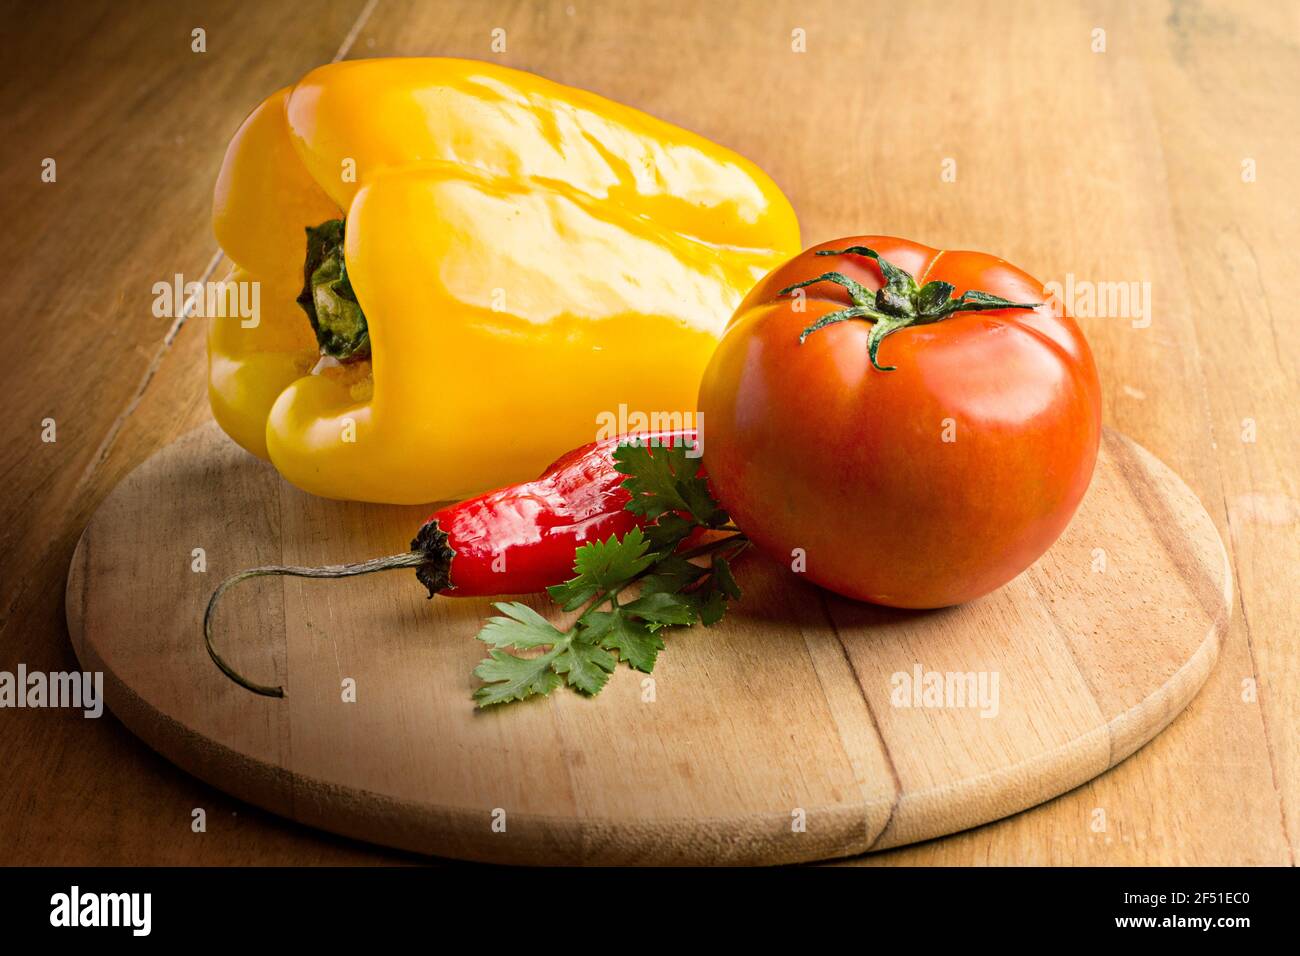 tomato yellow and red pepper on the wood table Stock Photo